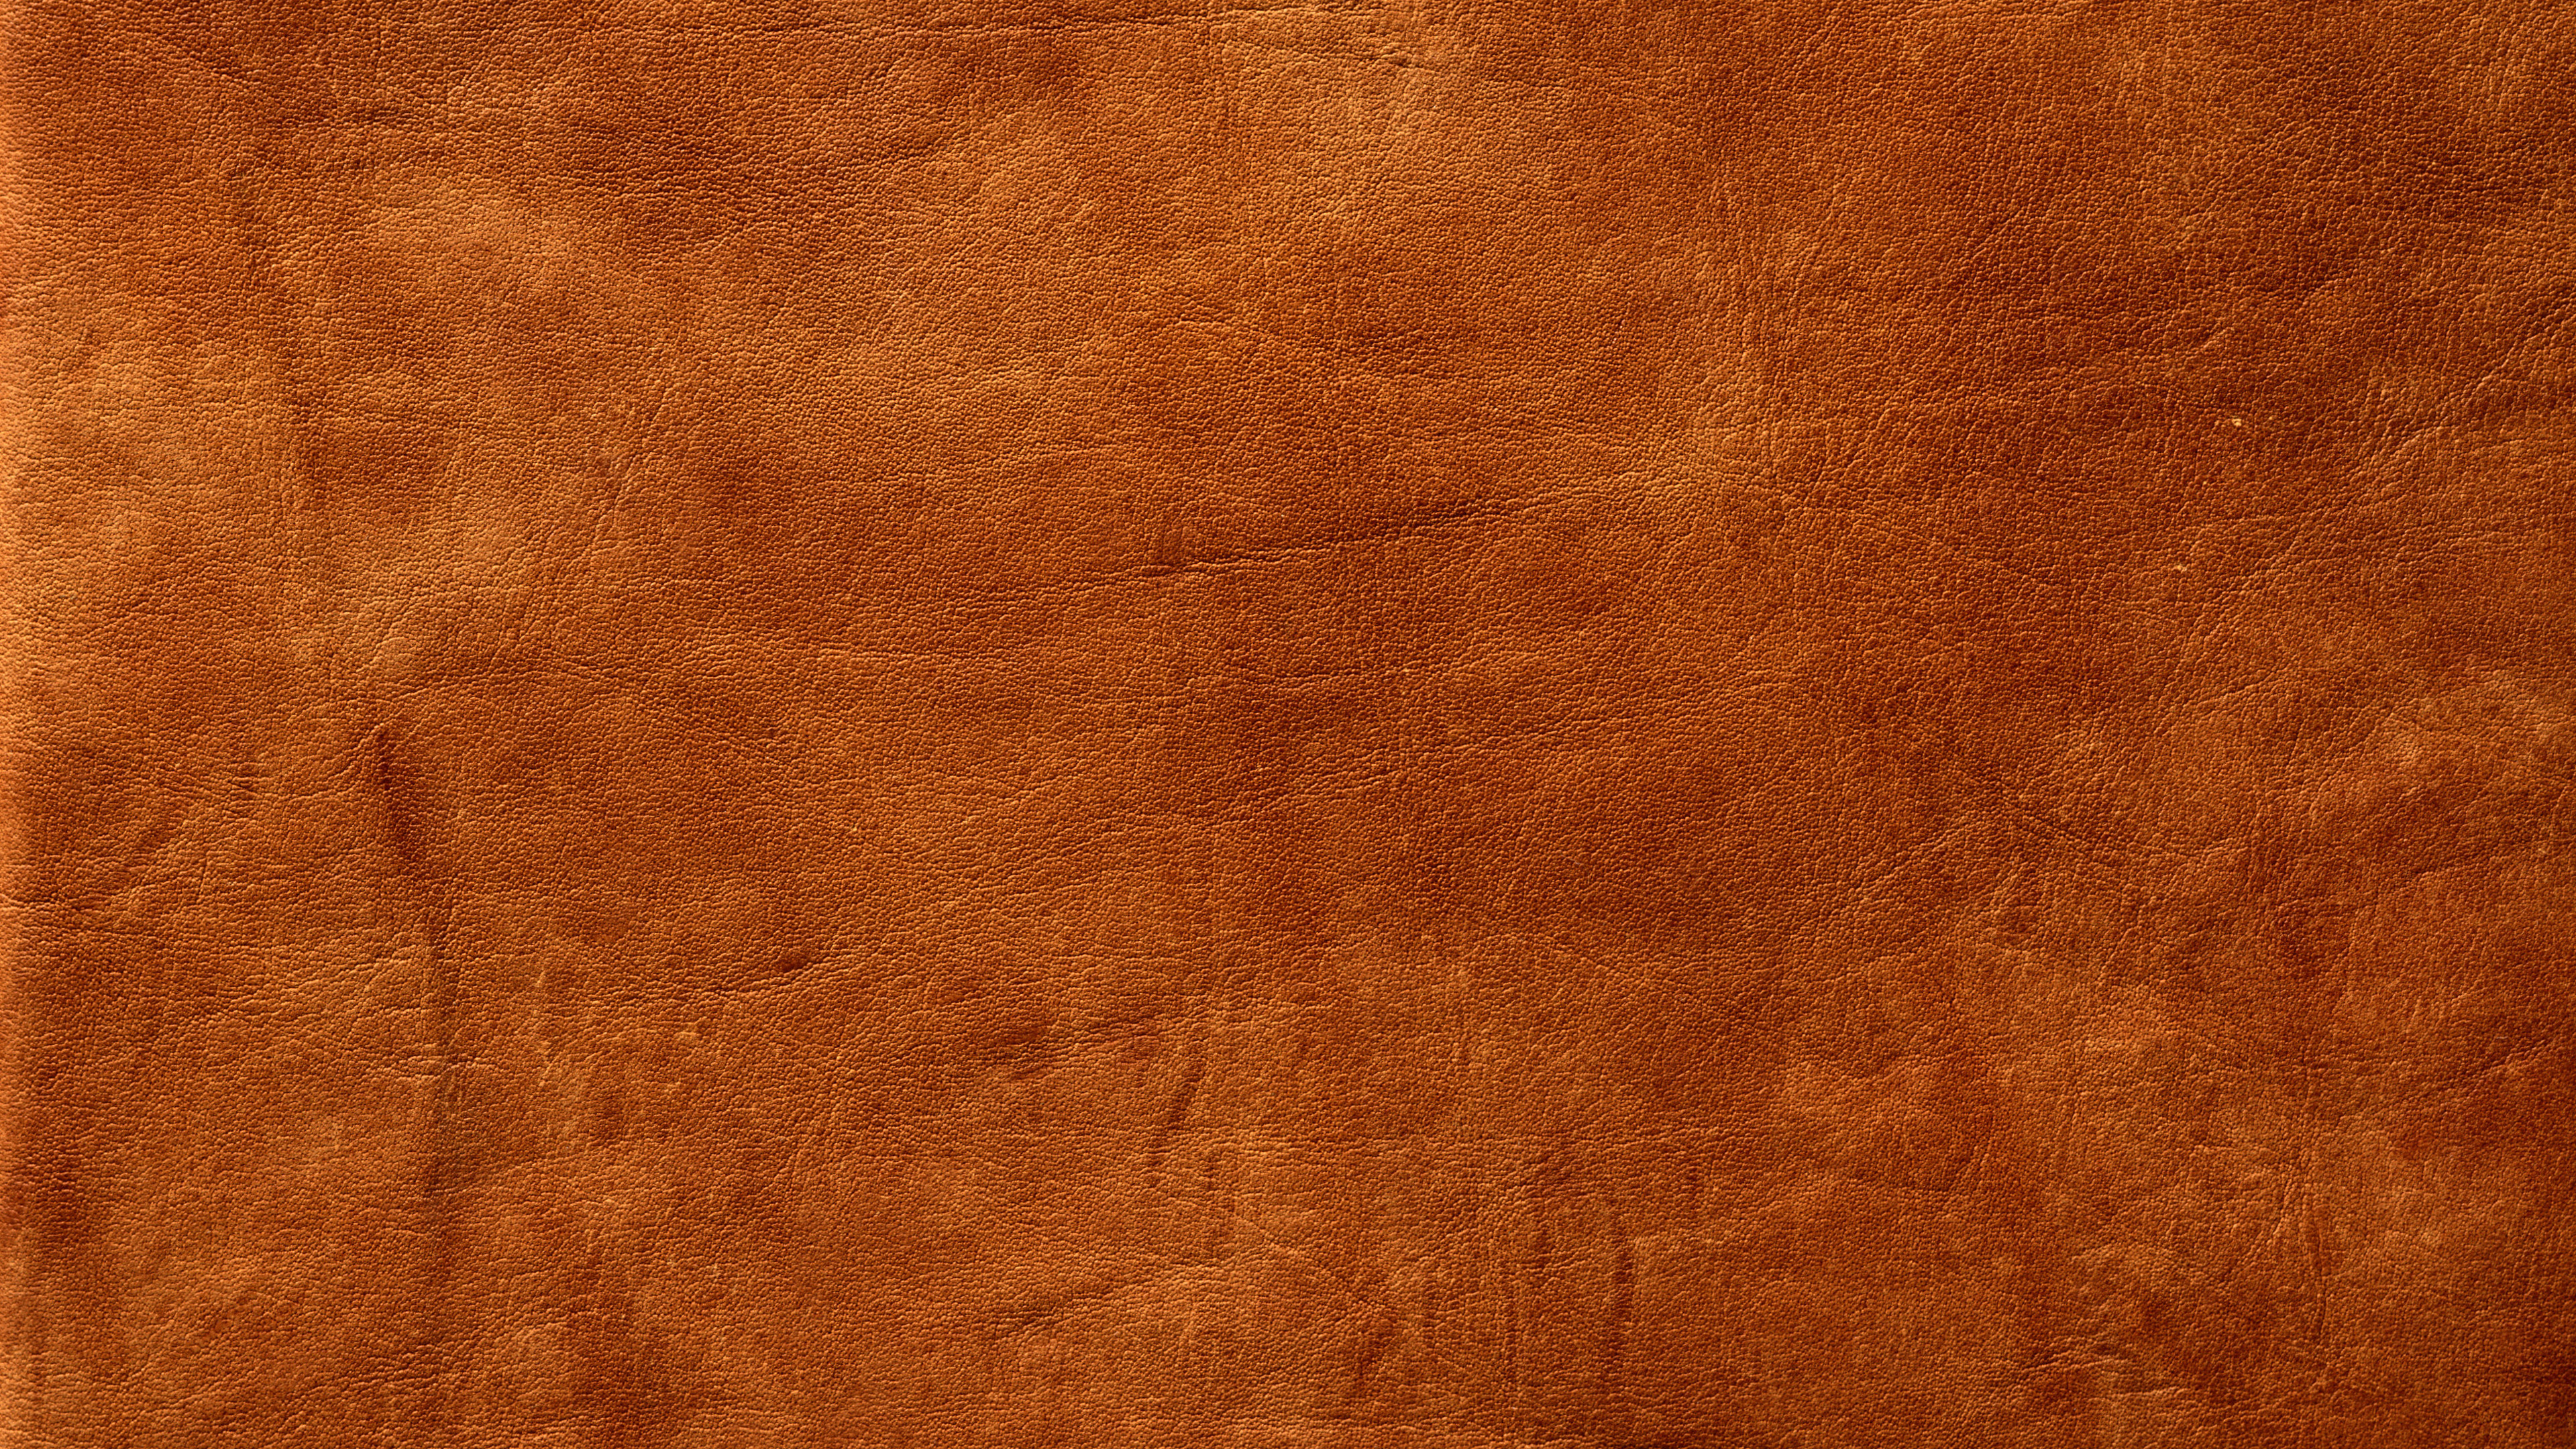 Brown Textile on Brown Wooden Table. Wallpaper in 3840x2160 Resolution